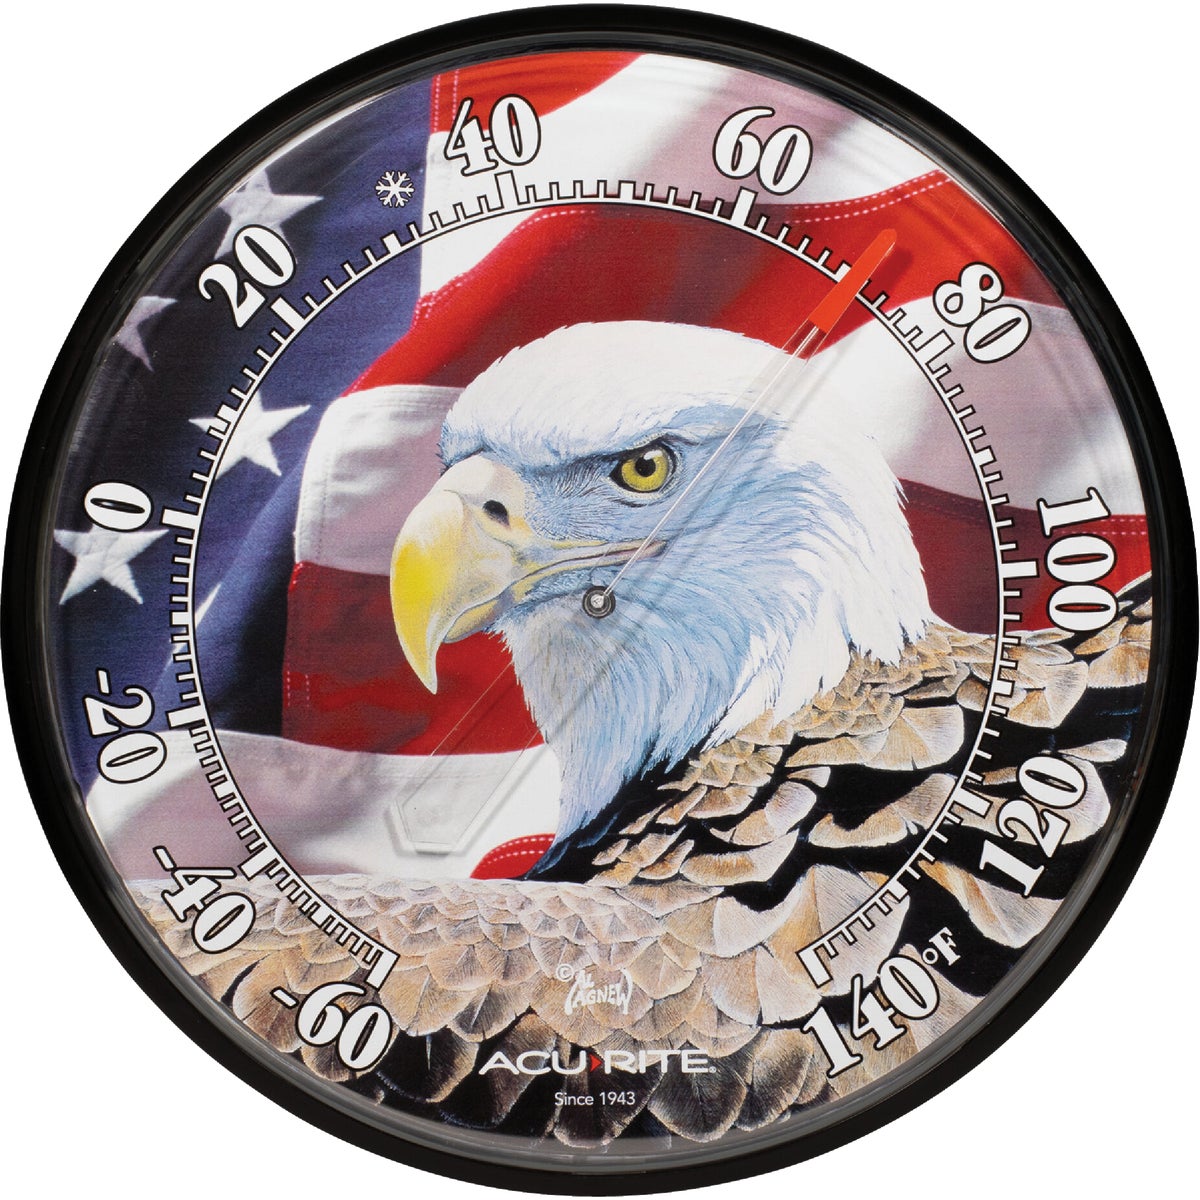 Item 600845, Thermometer captures the patriotic imagery of the American eagle on the 